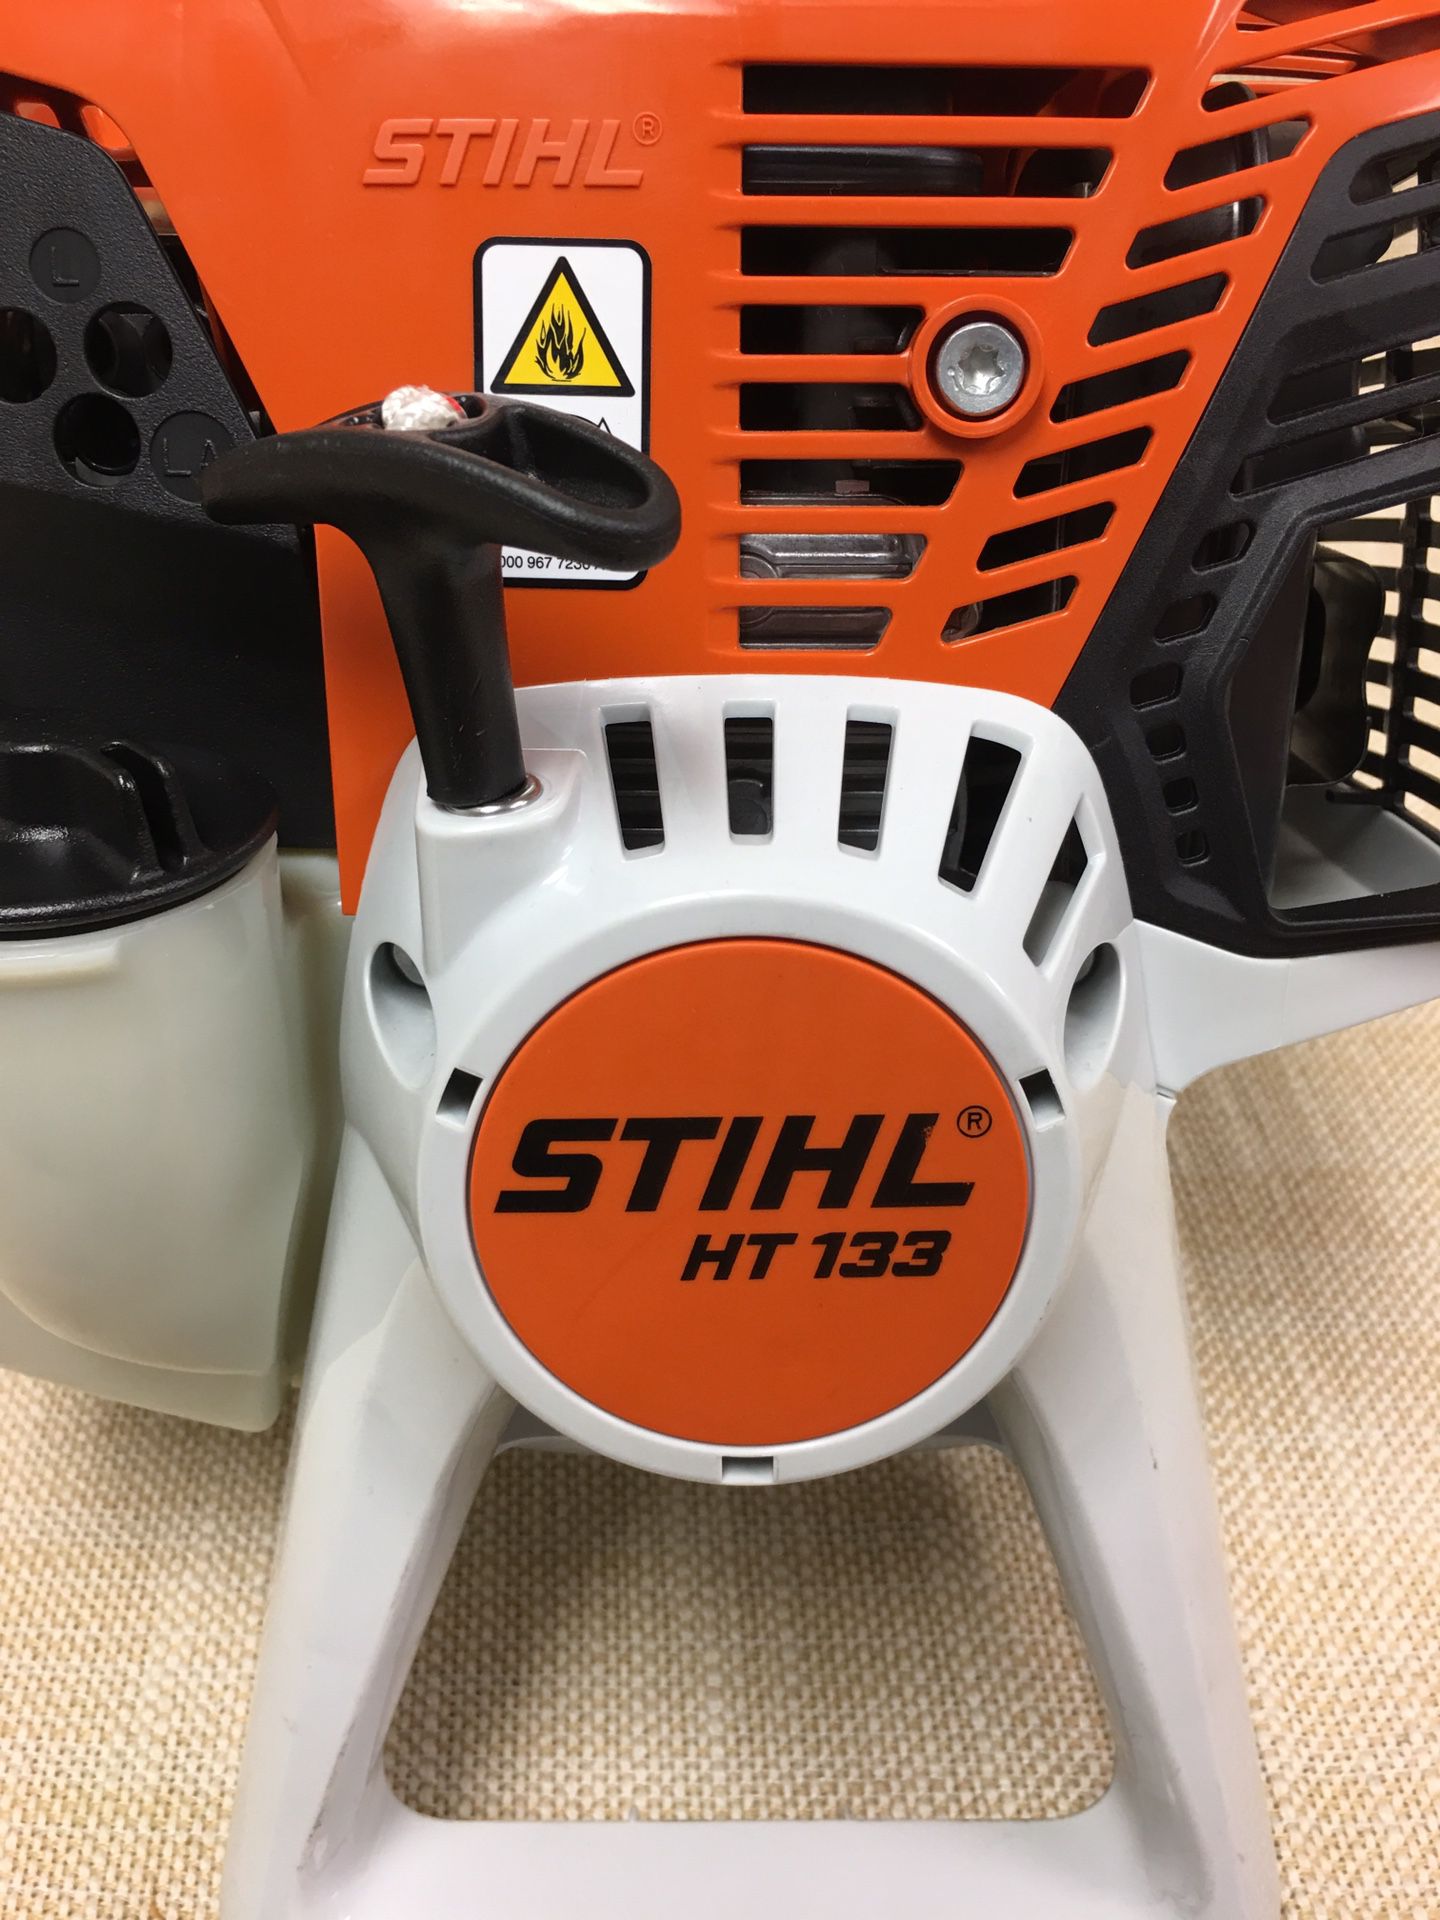 Stihl HT133 Or 103 pole pruner engine, Throttle and trigger assembly